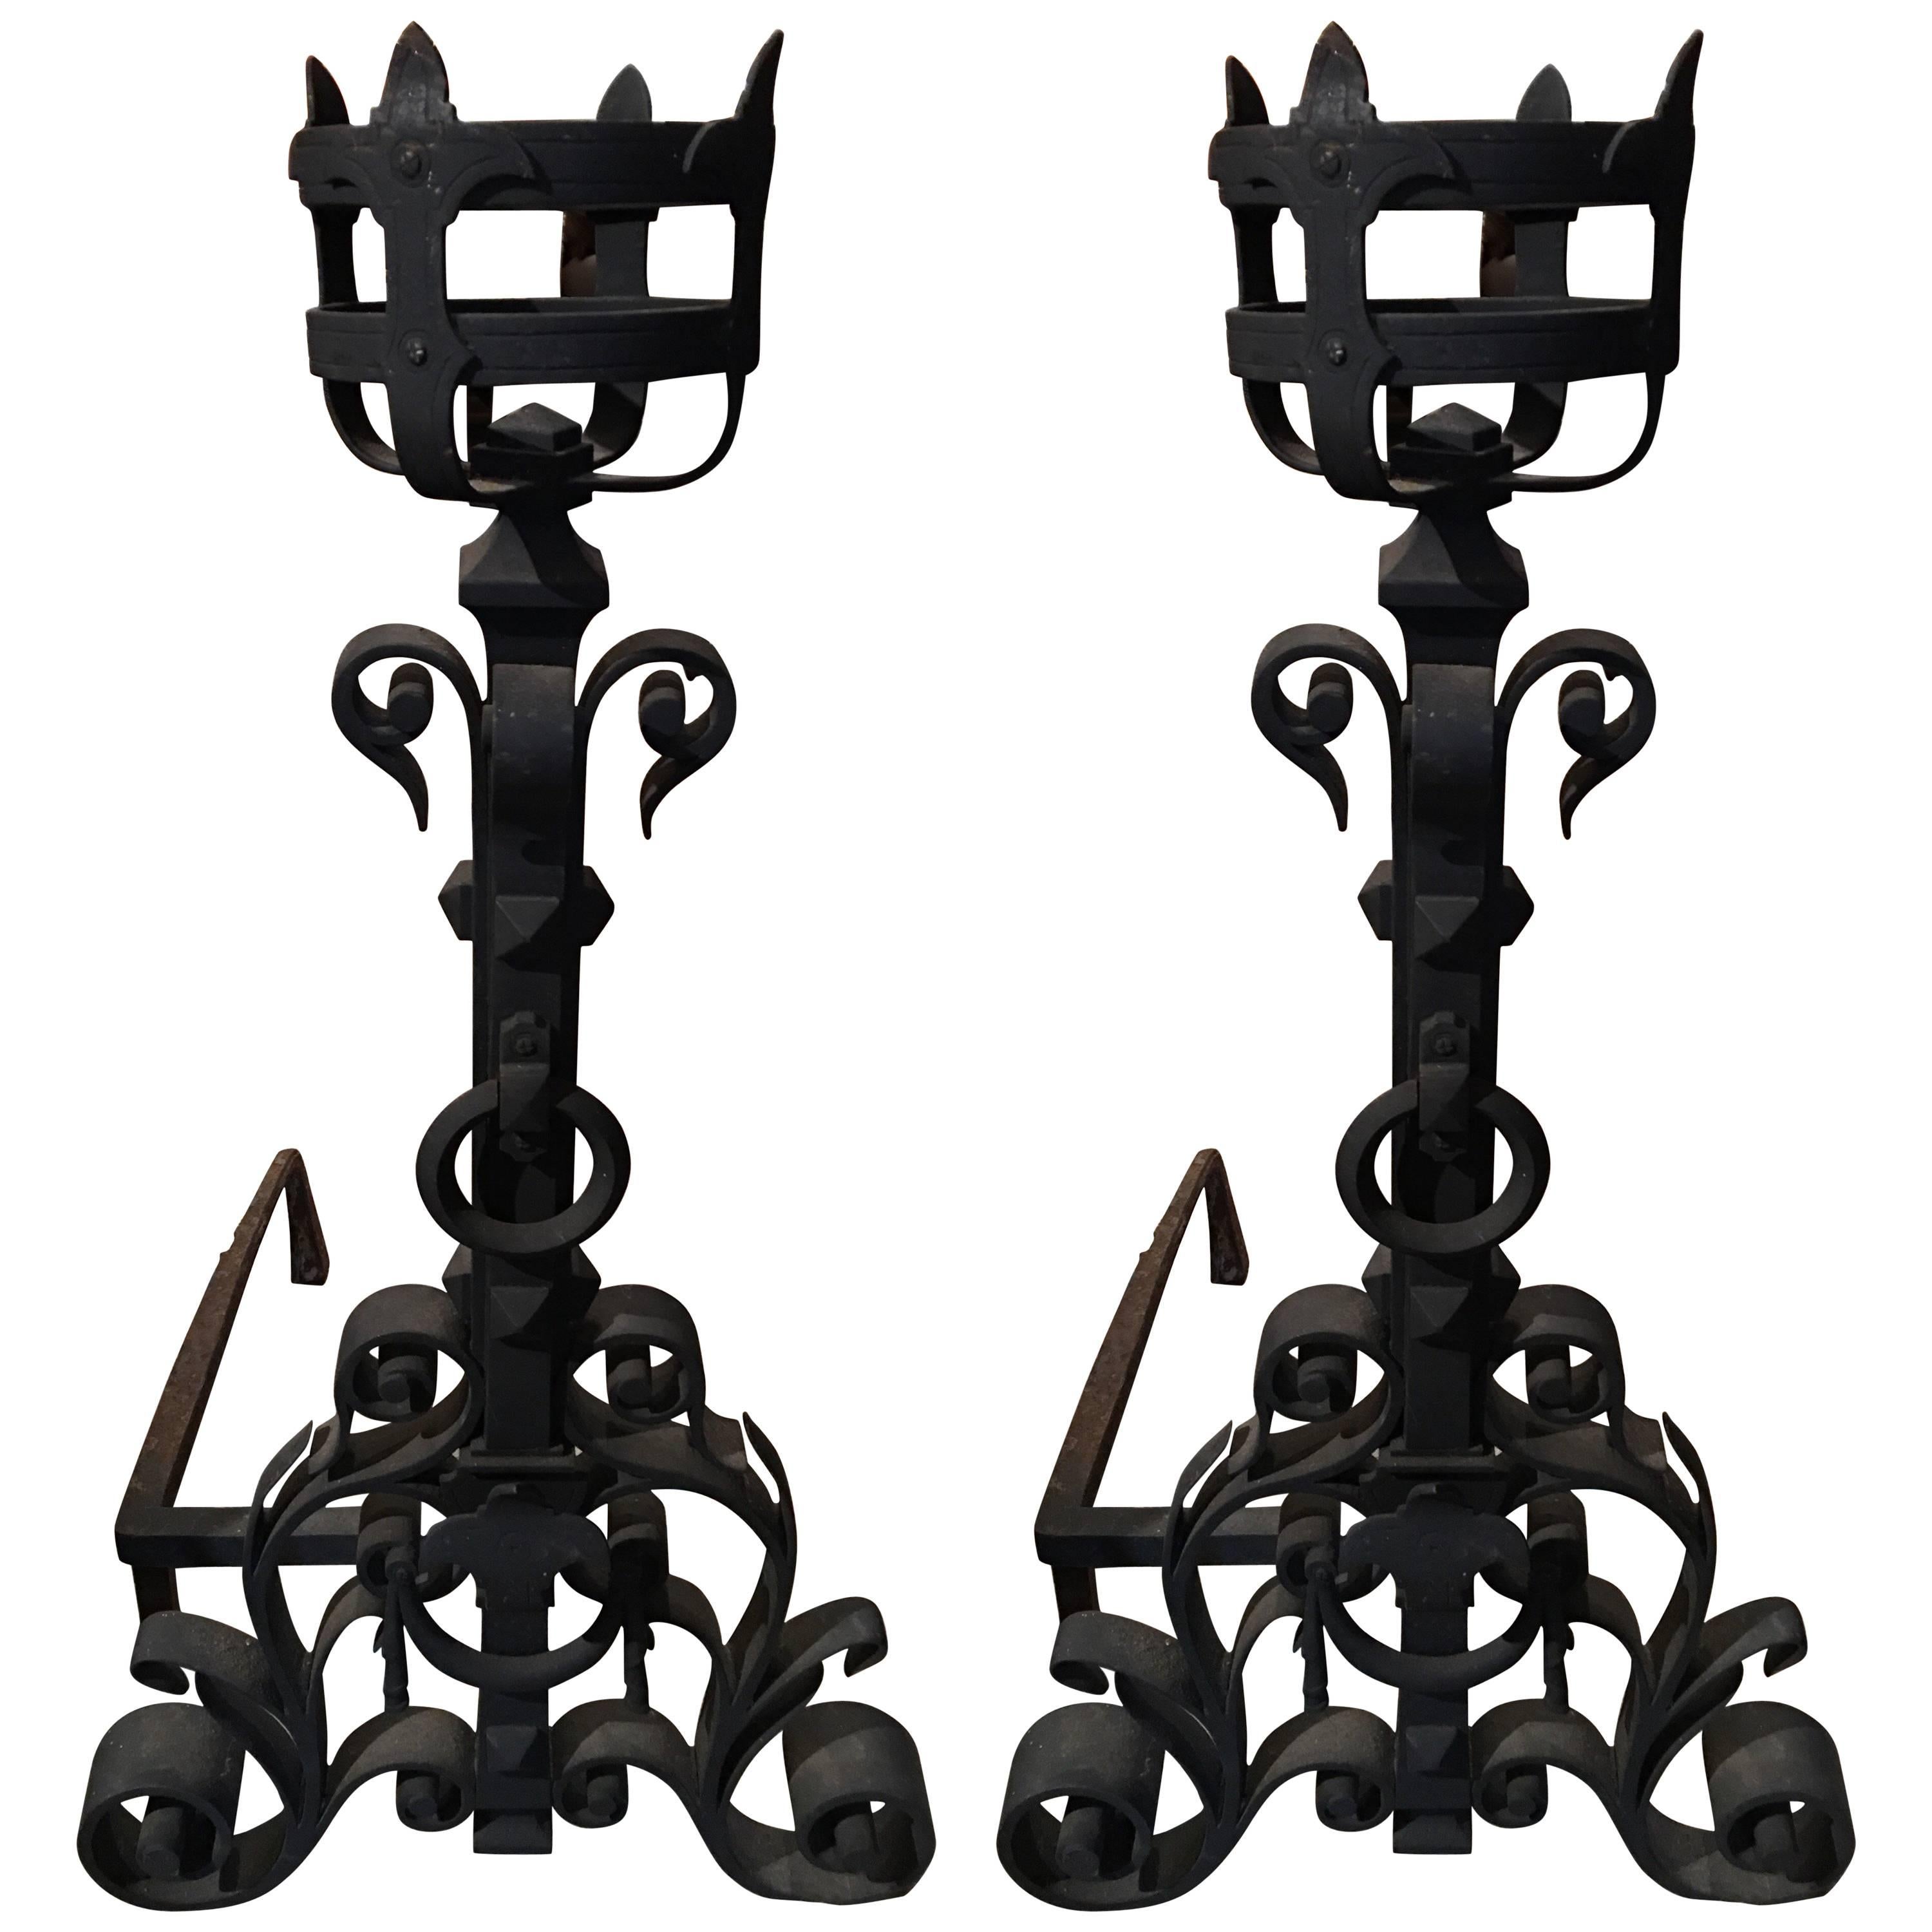 Pair of Iron Chenets or Andirons with a Basket Finial Top, 19th Century